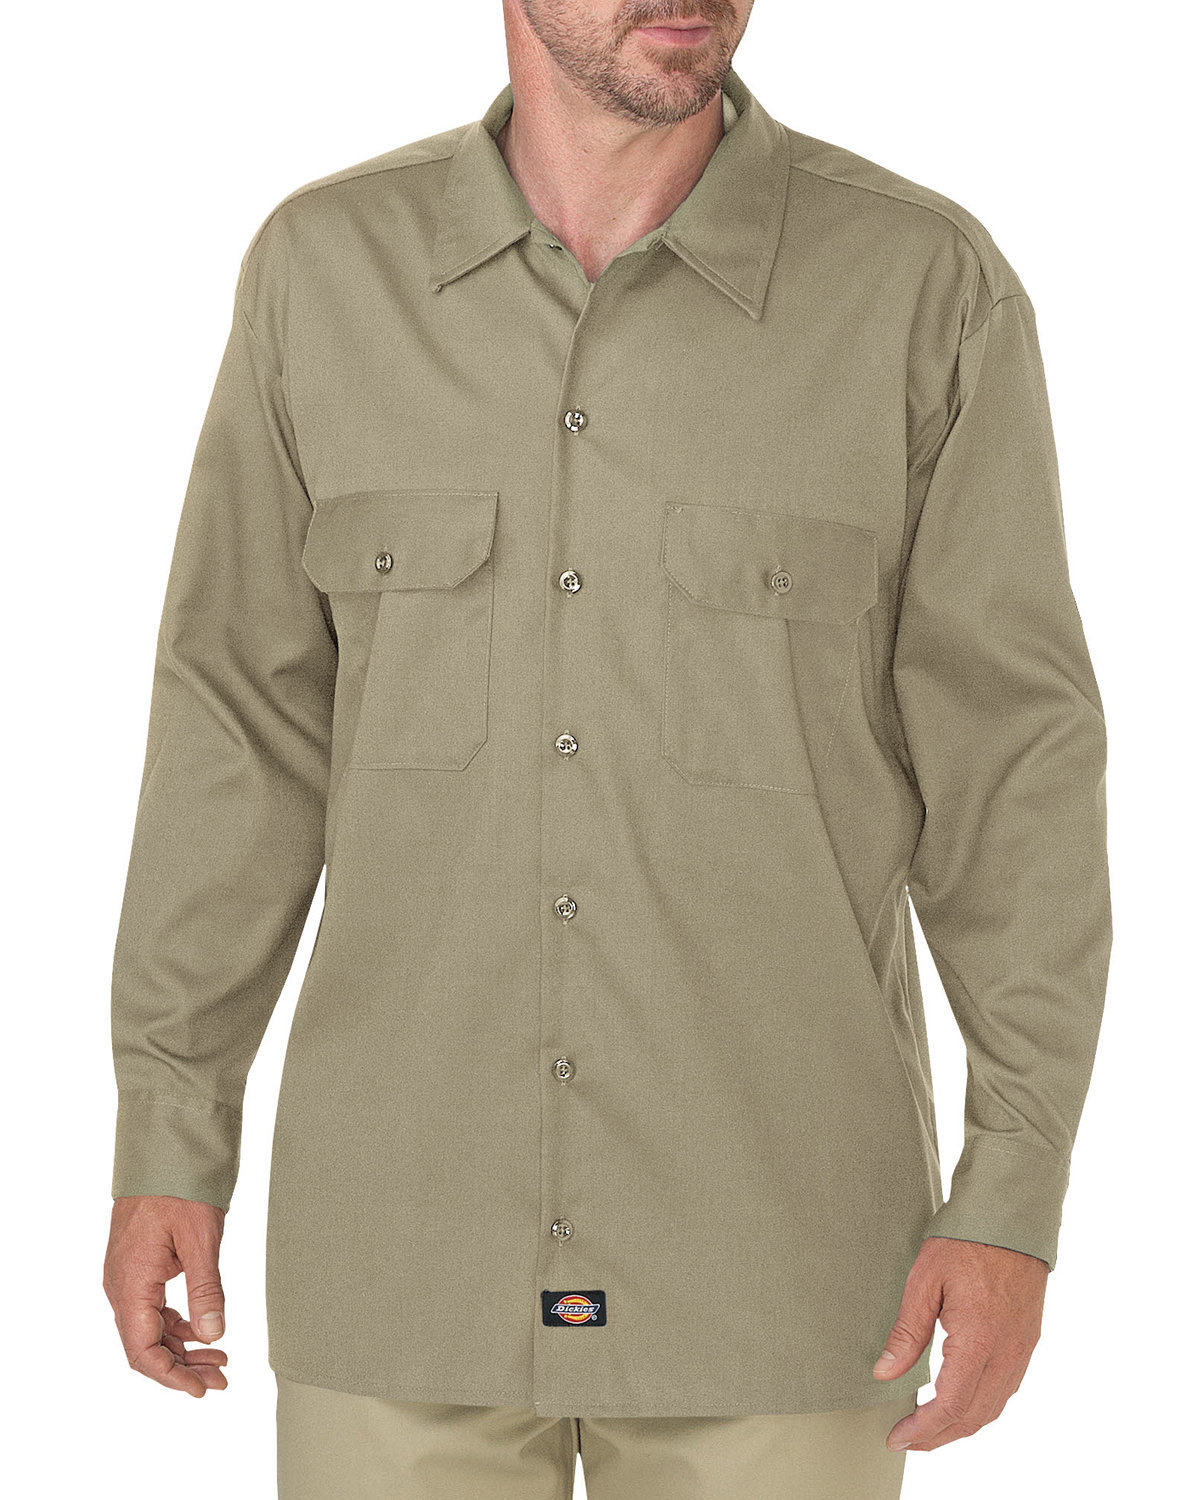 Mens Flex Relaxed Fit Long-Sleeve Twill Work Shirt-Dickies